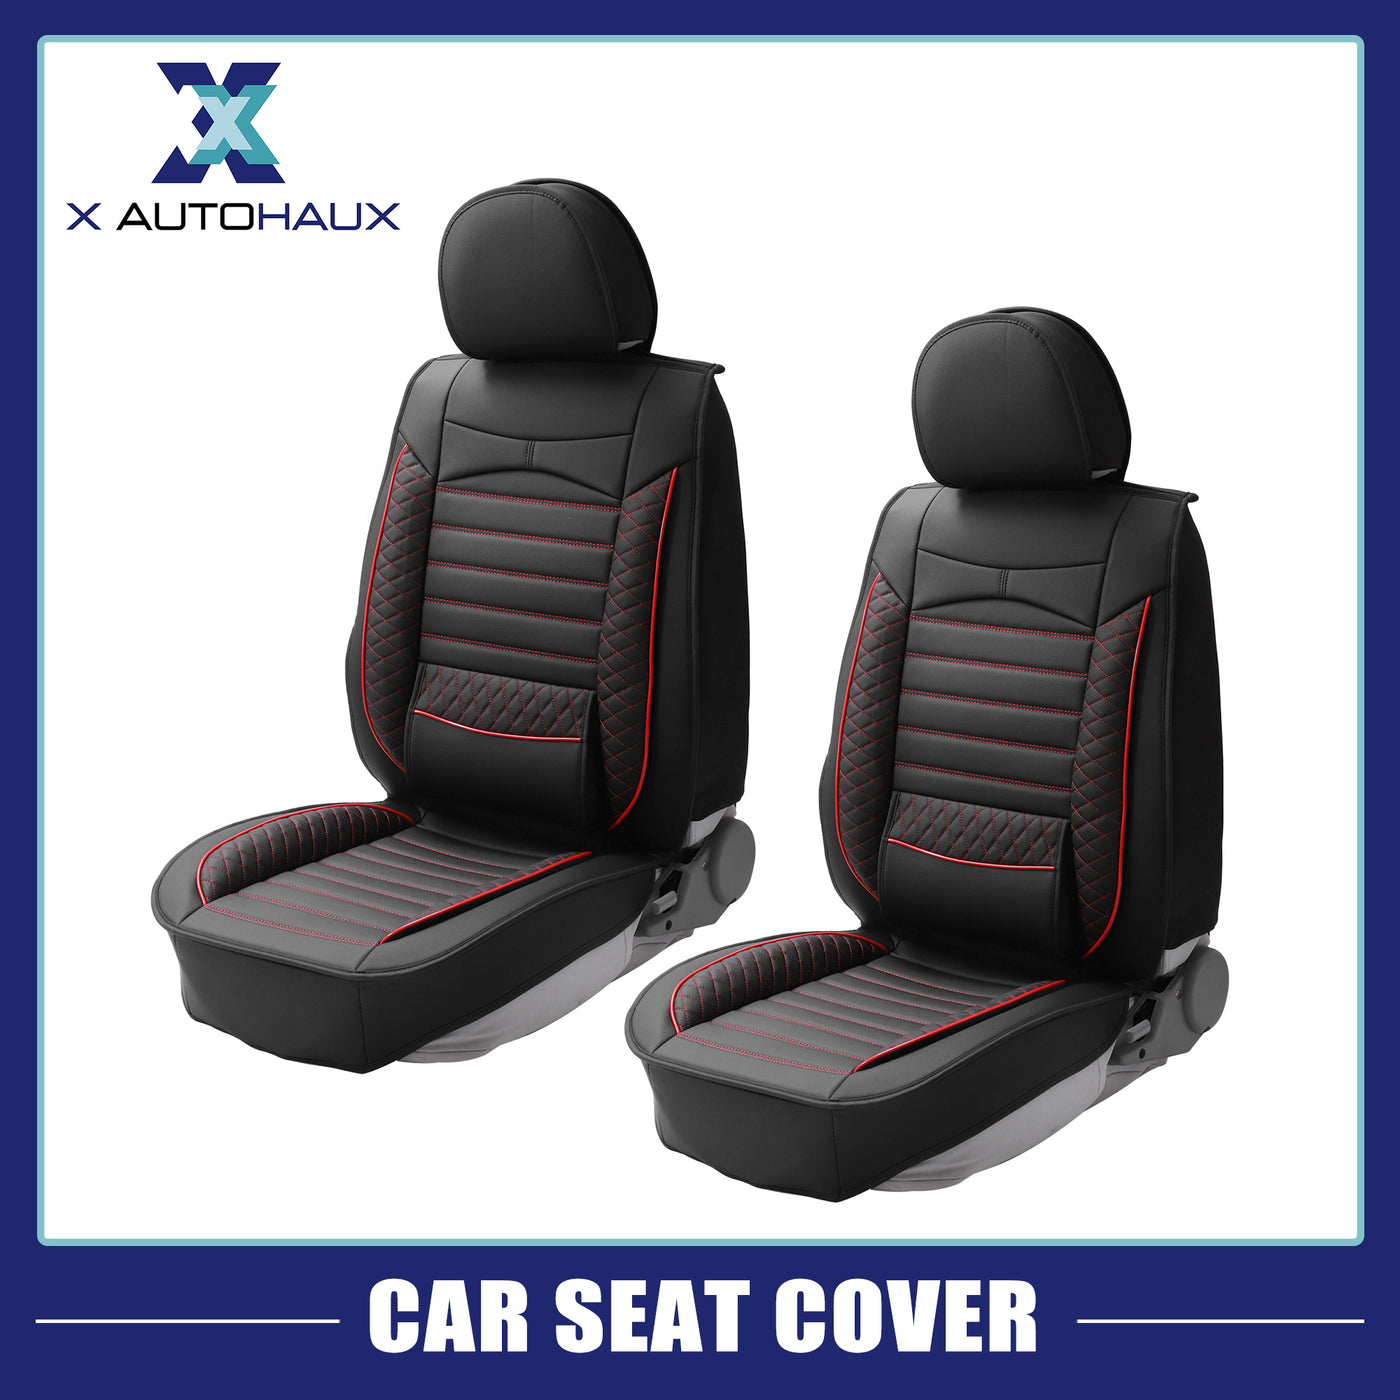 ACROPIX 2 Seat Leather Universal Car Seat Covers Seat Protectors Waterproof Vehicle Cushion Cover for Front Seat SUV Pick-up Trucks with Lumbar Support - Pack of 2